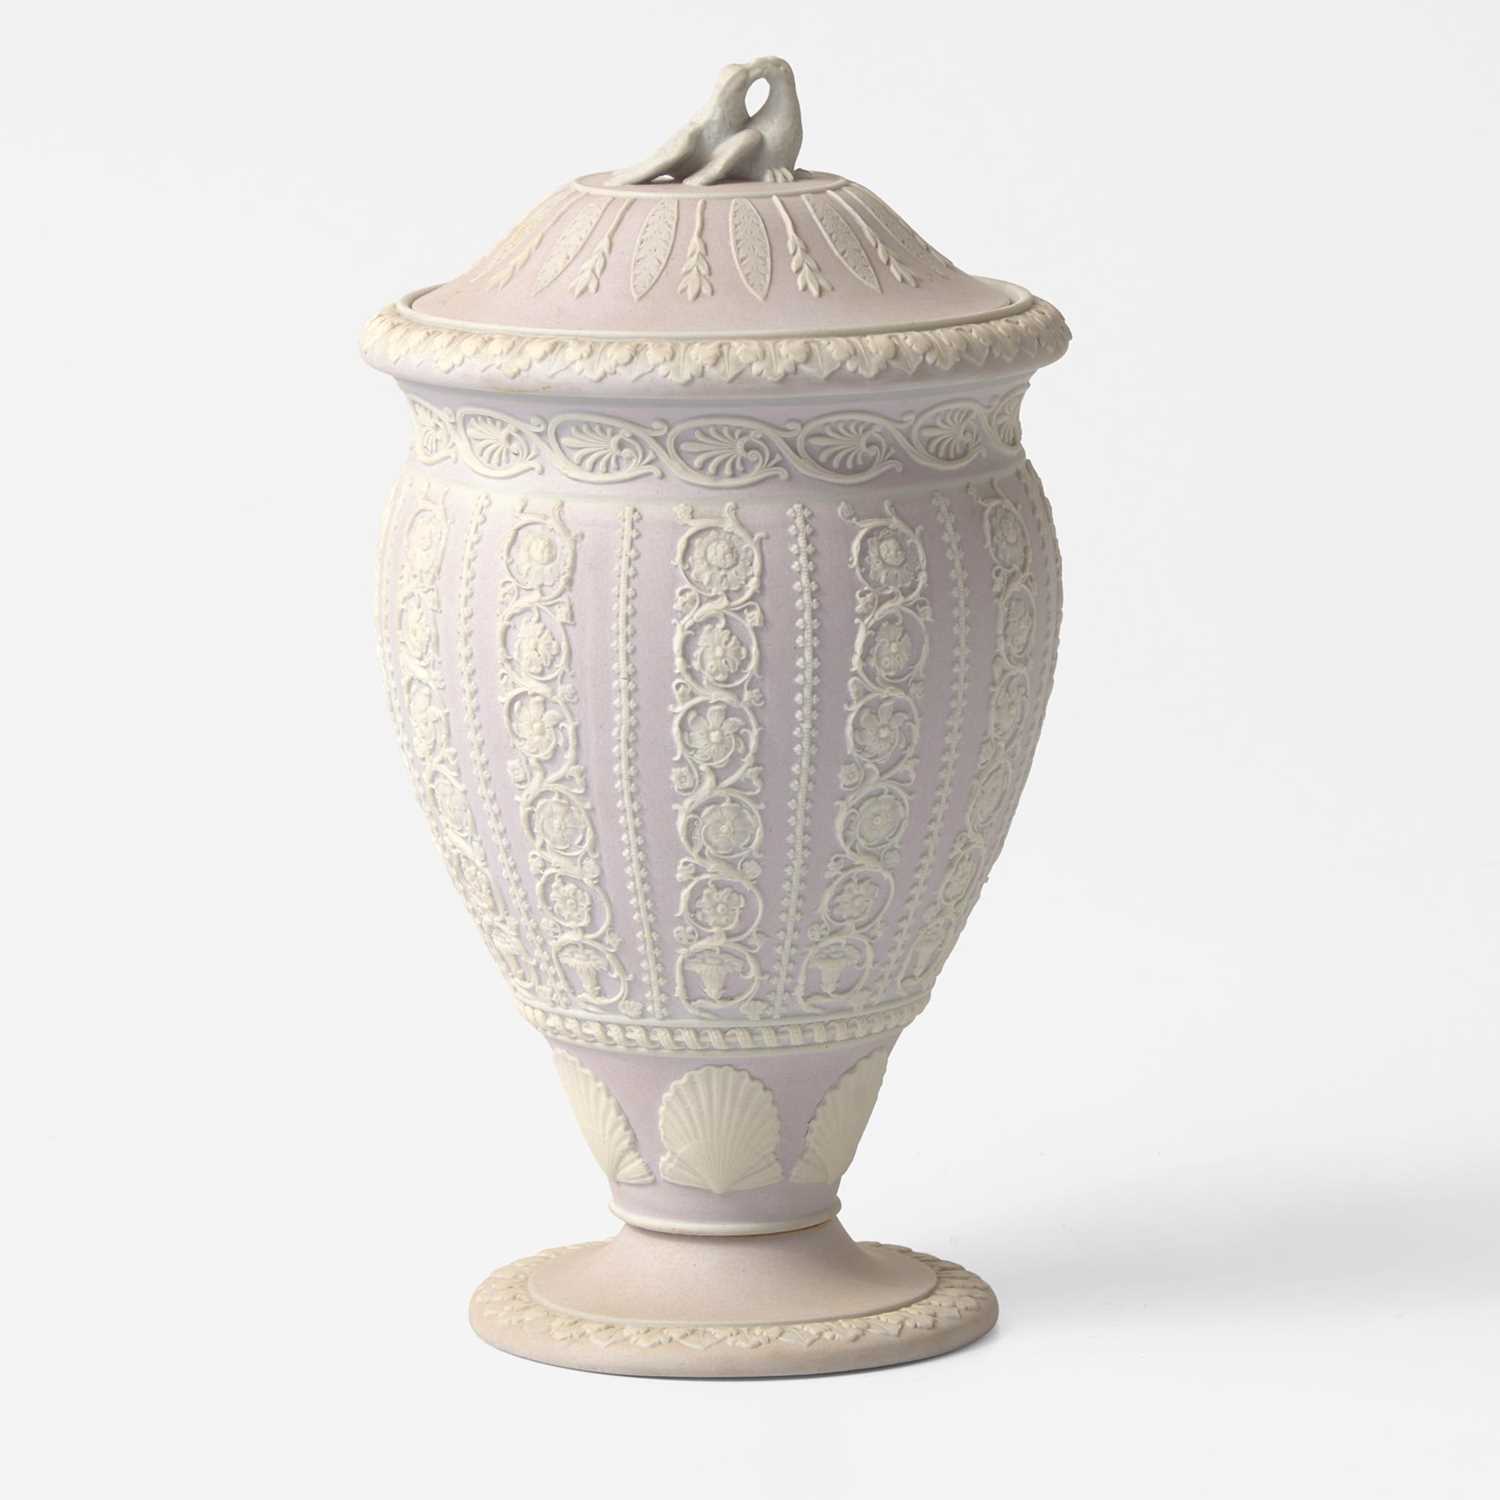 Lot 90 - A Wedgwood Lilac Dip Jasperware "Shell and Arabesque" Vase and Cover